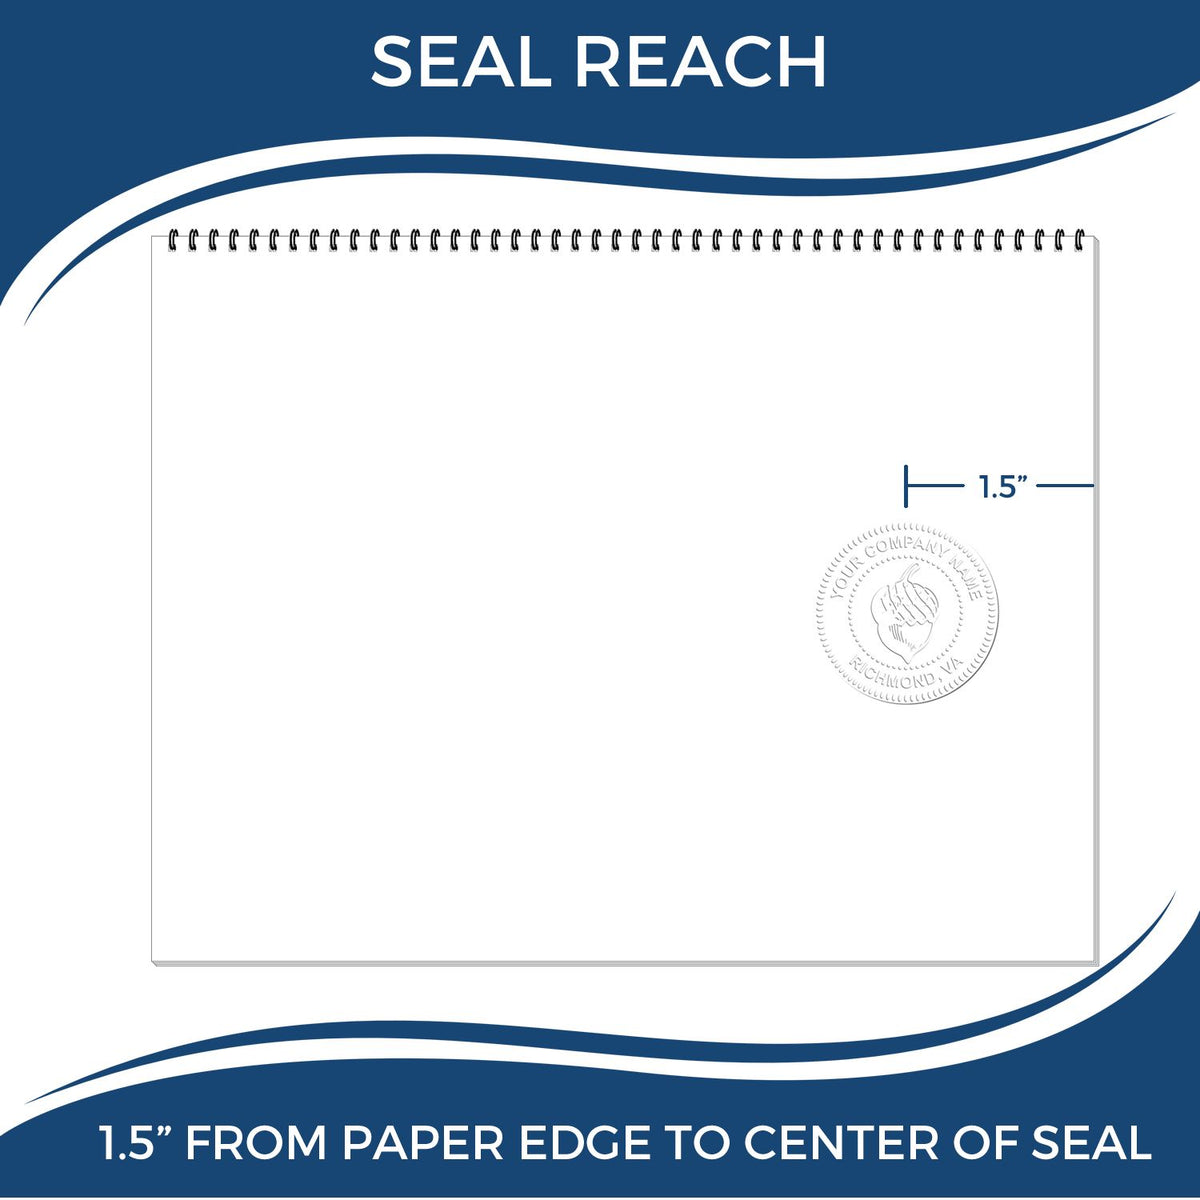 An infographic showing the seal reach which is represented by a ruler and a miniature seal image of the District of Columbia Engineer Desk Seal